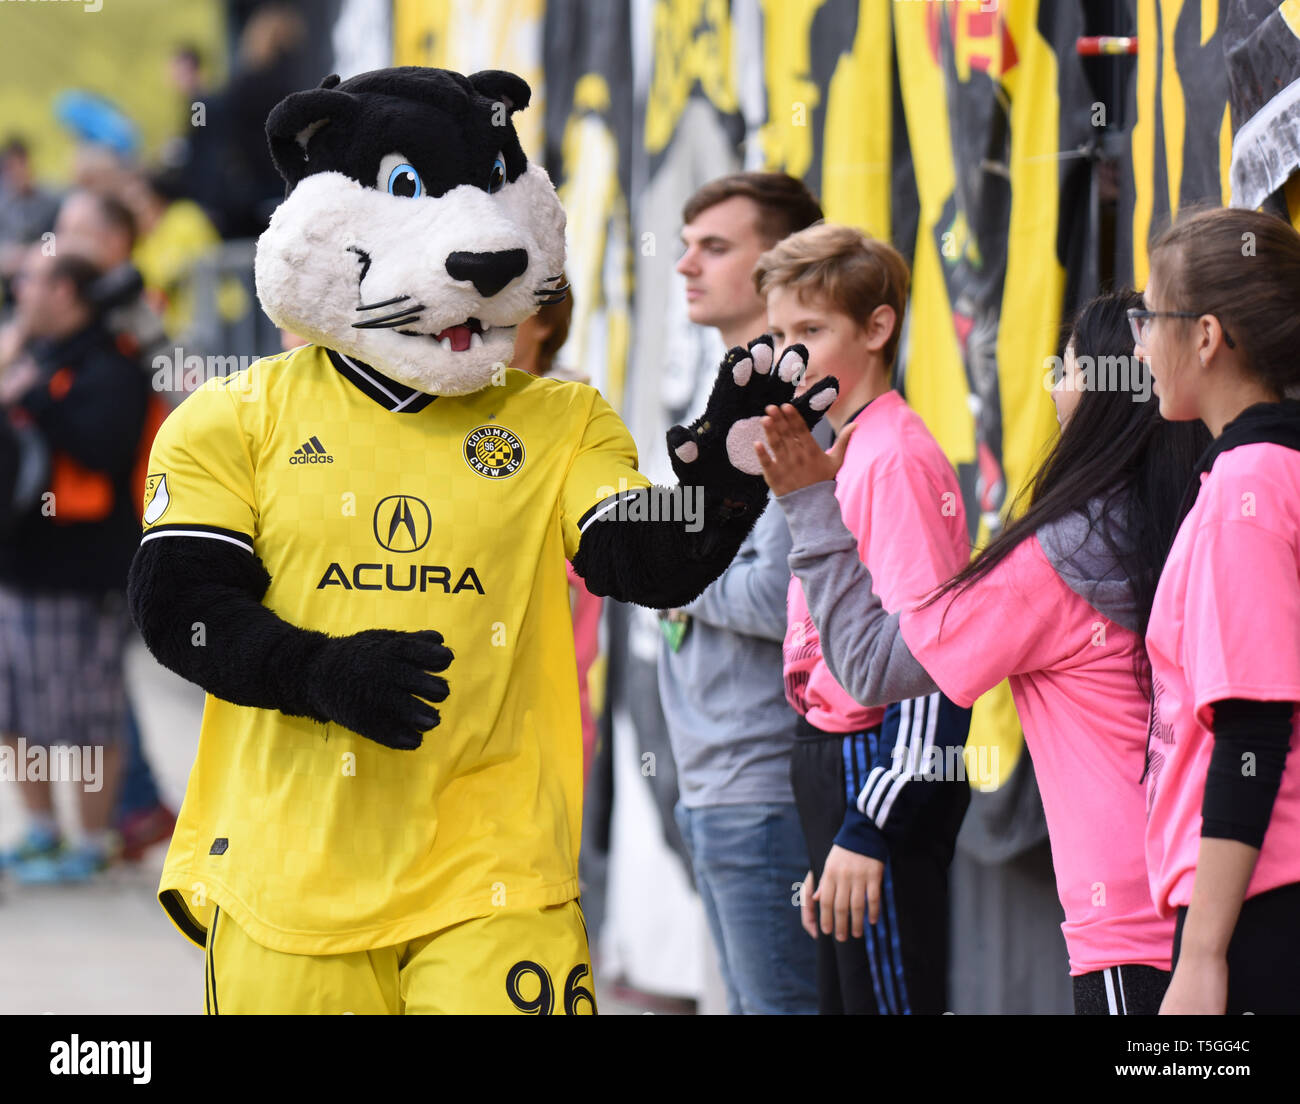 Columbus, OH, USA. 24th Apr, 2019. April 24, 2019: The Columbus Crew ''Crew Cat'' high fives young fans before the MLS match between DC United and Columbus Crew SC at Mapfre Stadium in Columbus, Ohio. Austyn McFadden/ZUMA Credit: Austyn McFadden/ZUMA Wire/Alamy Live News Stock Photo